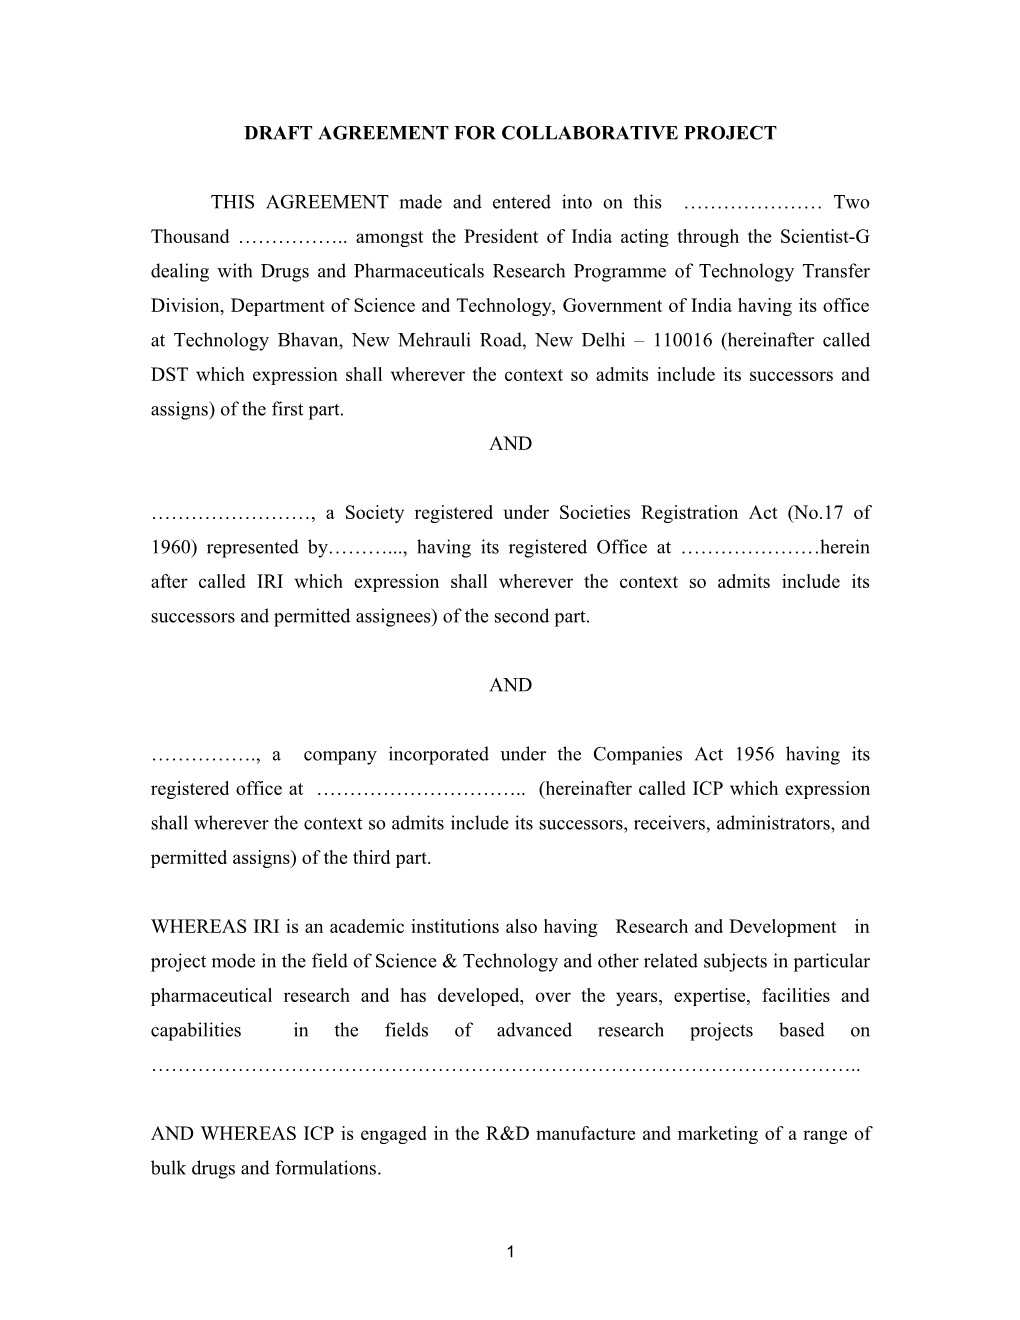 Draft Agreement for Collaborative Project